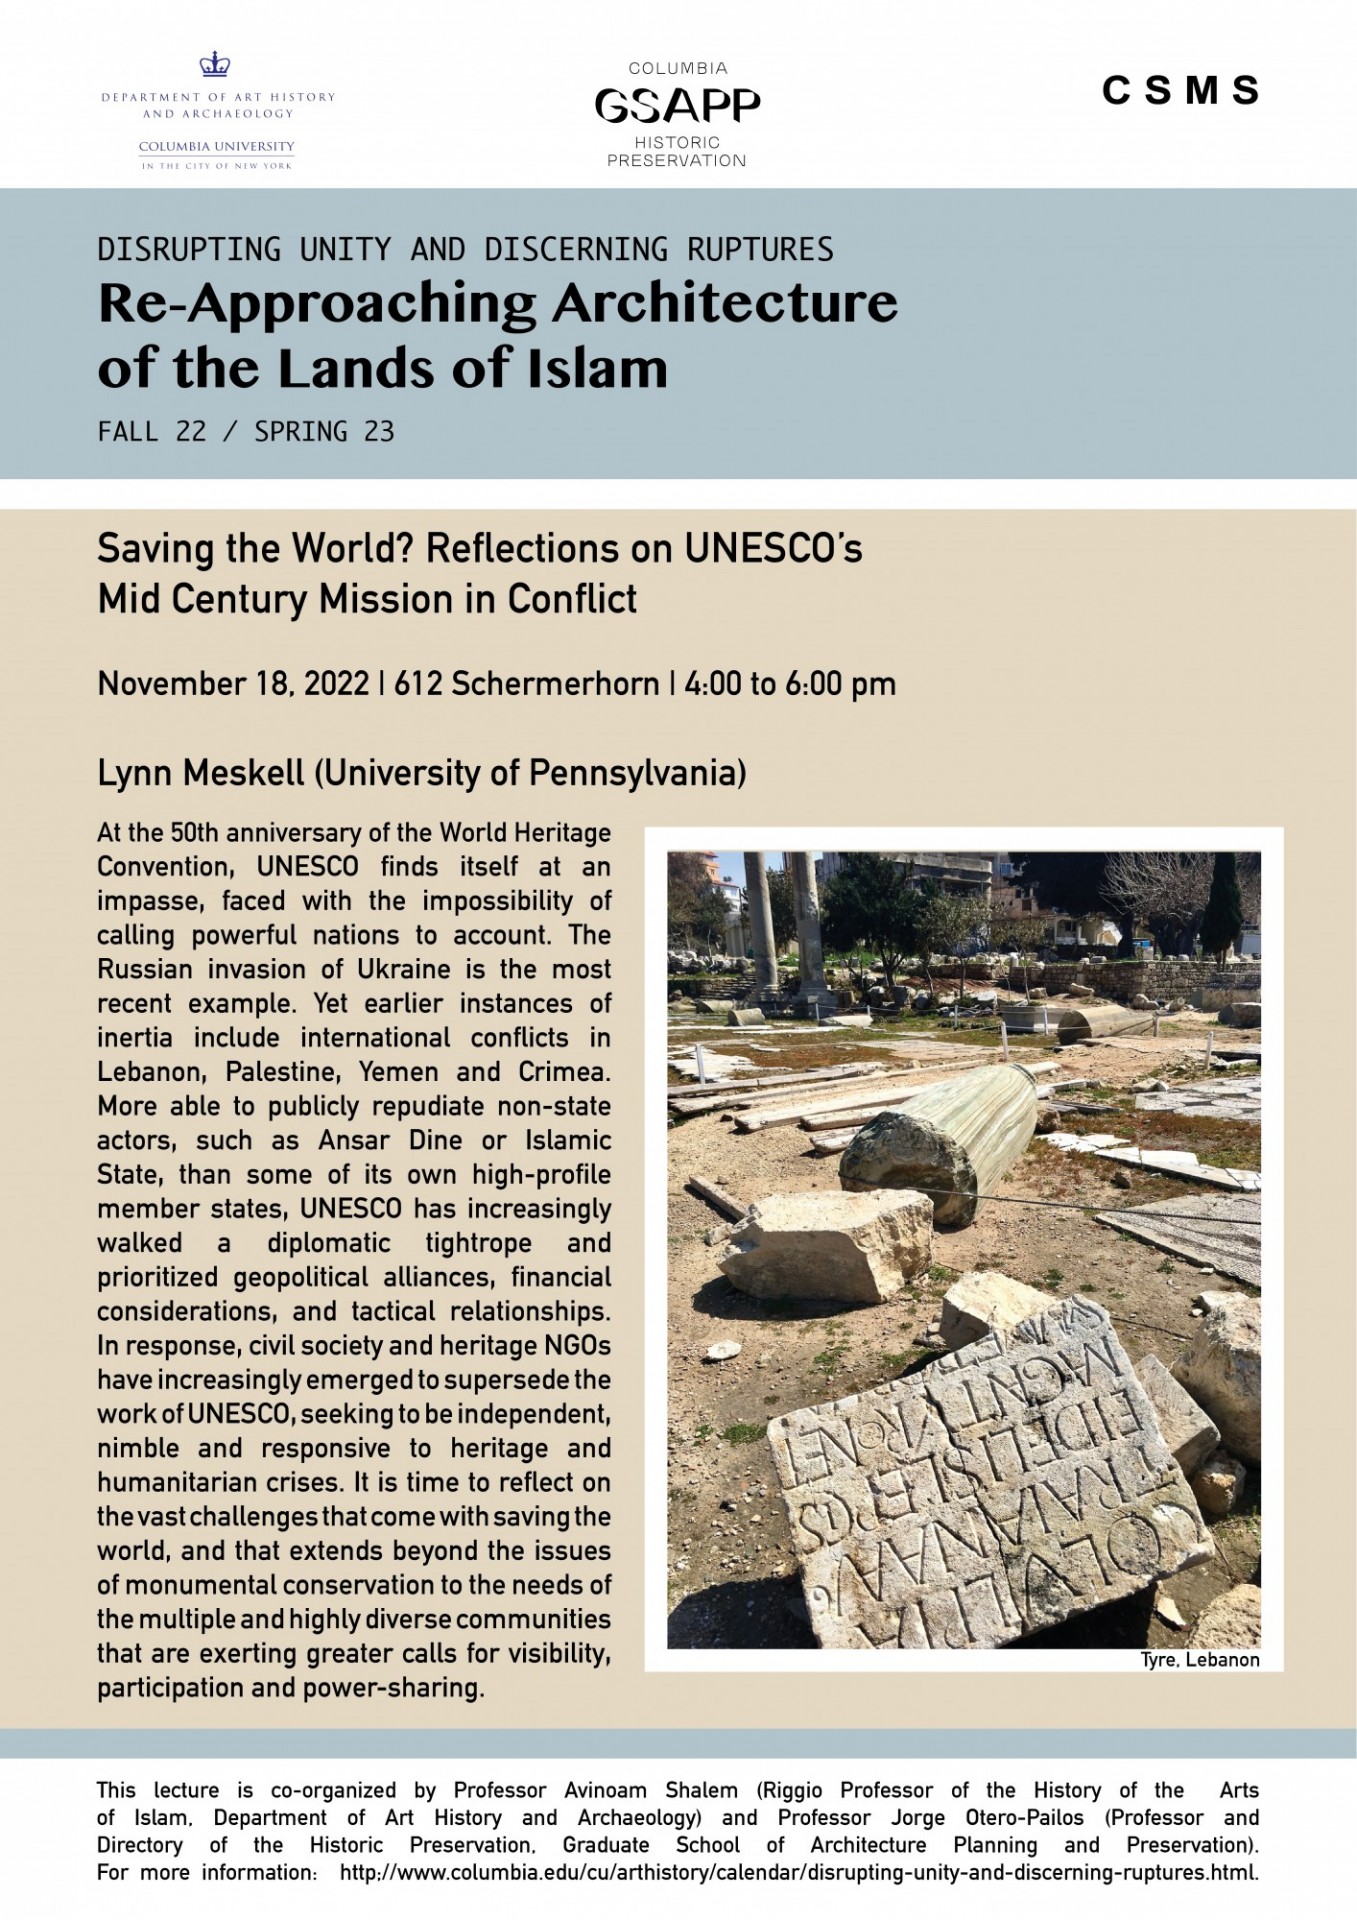 Poster for lecture by Lynn Meskell